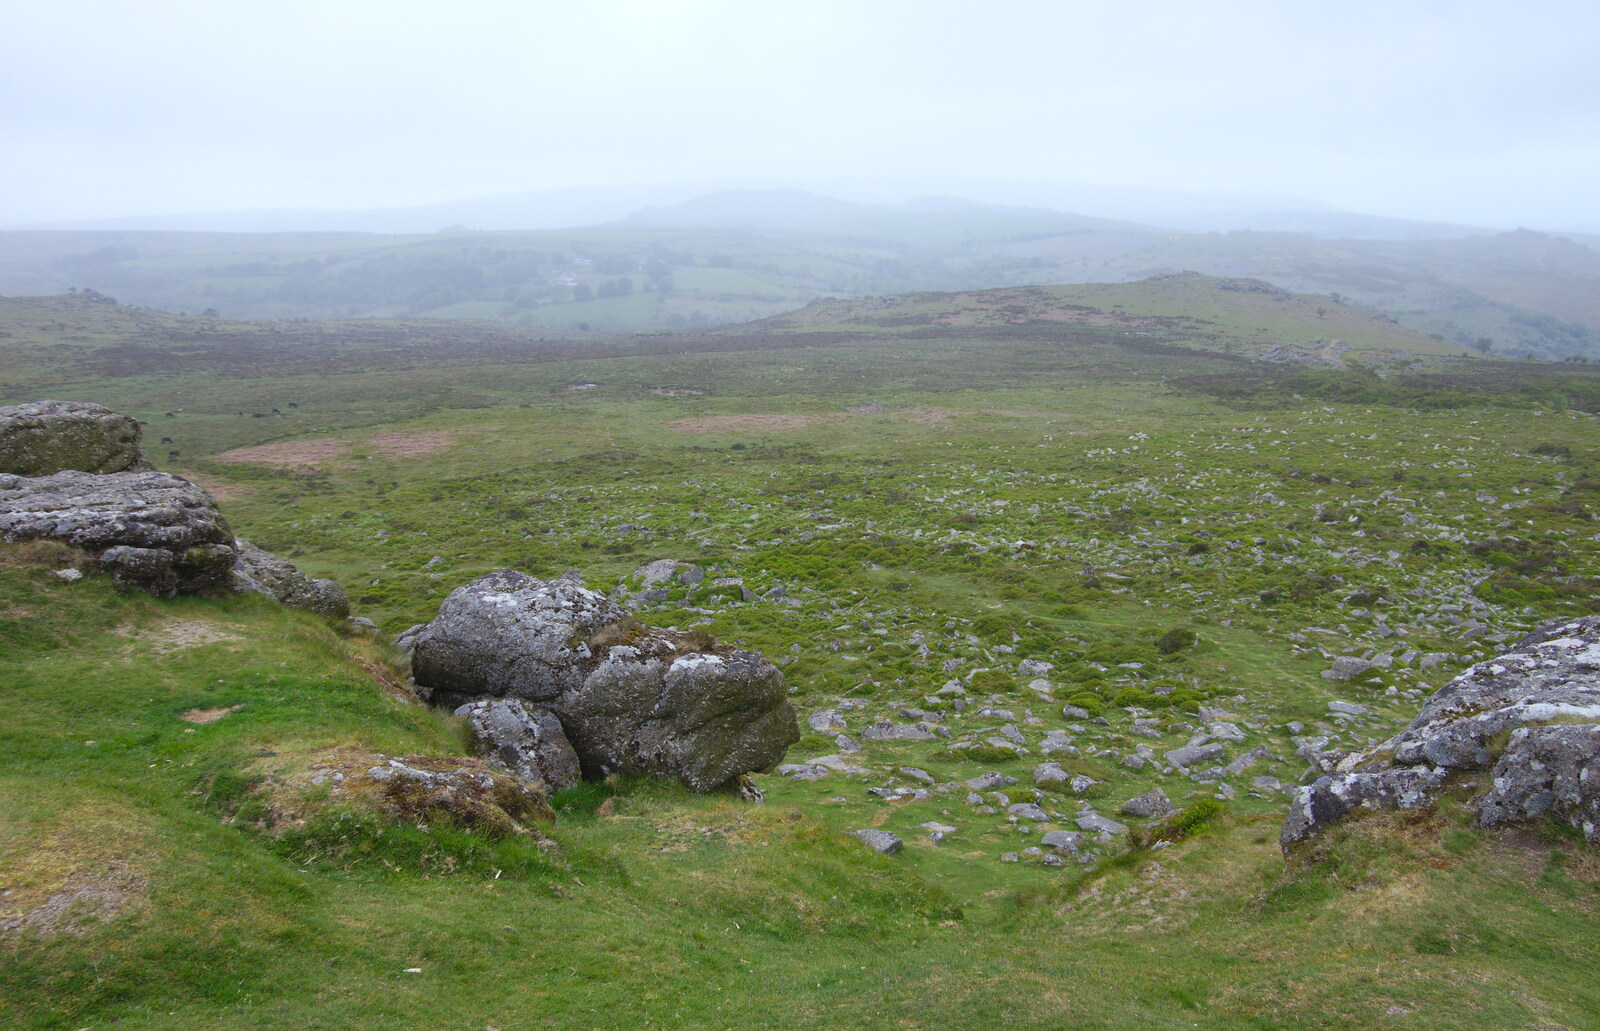 A murky Dartmoor view from Hay Tor from The Tom Cobley and a Return to Haytor, Bovey Tracey, Devon - 27th May 2019